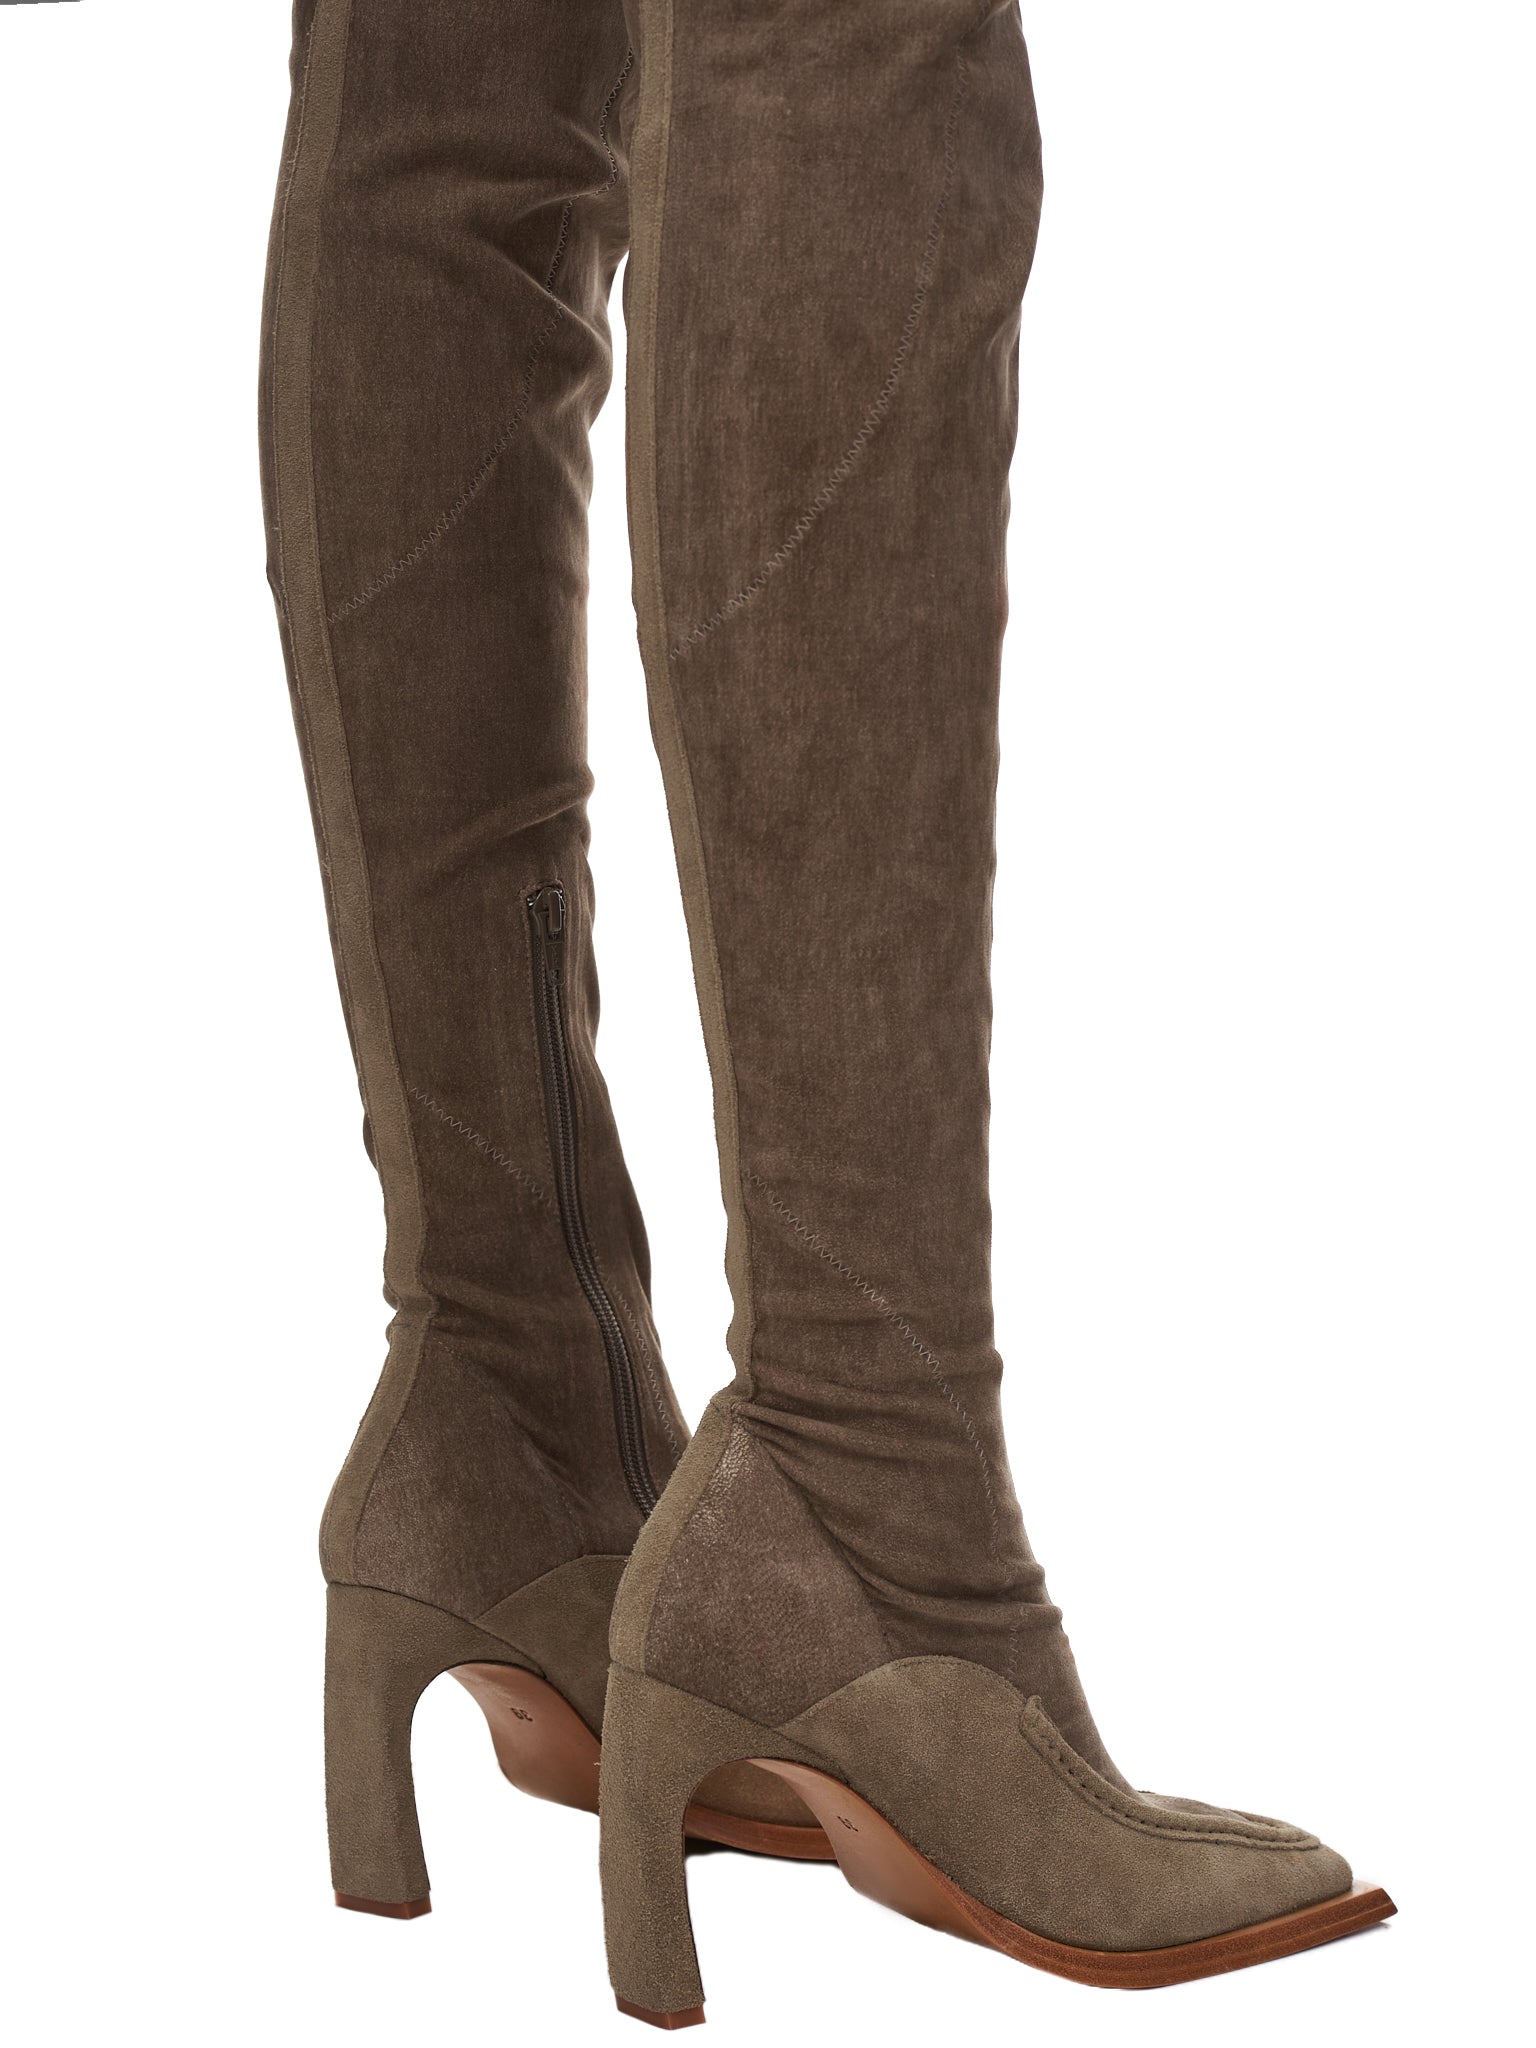 Charlotte Knowles Fawn Boots | H. Lorenzo - side 3